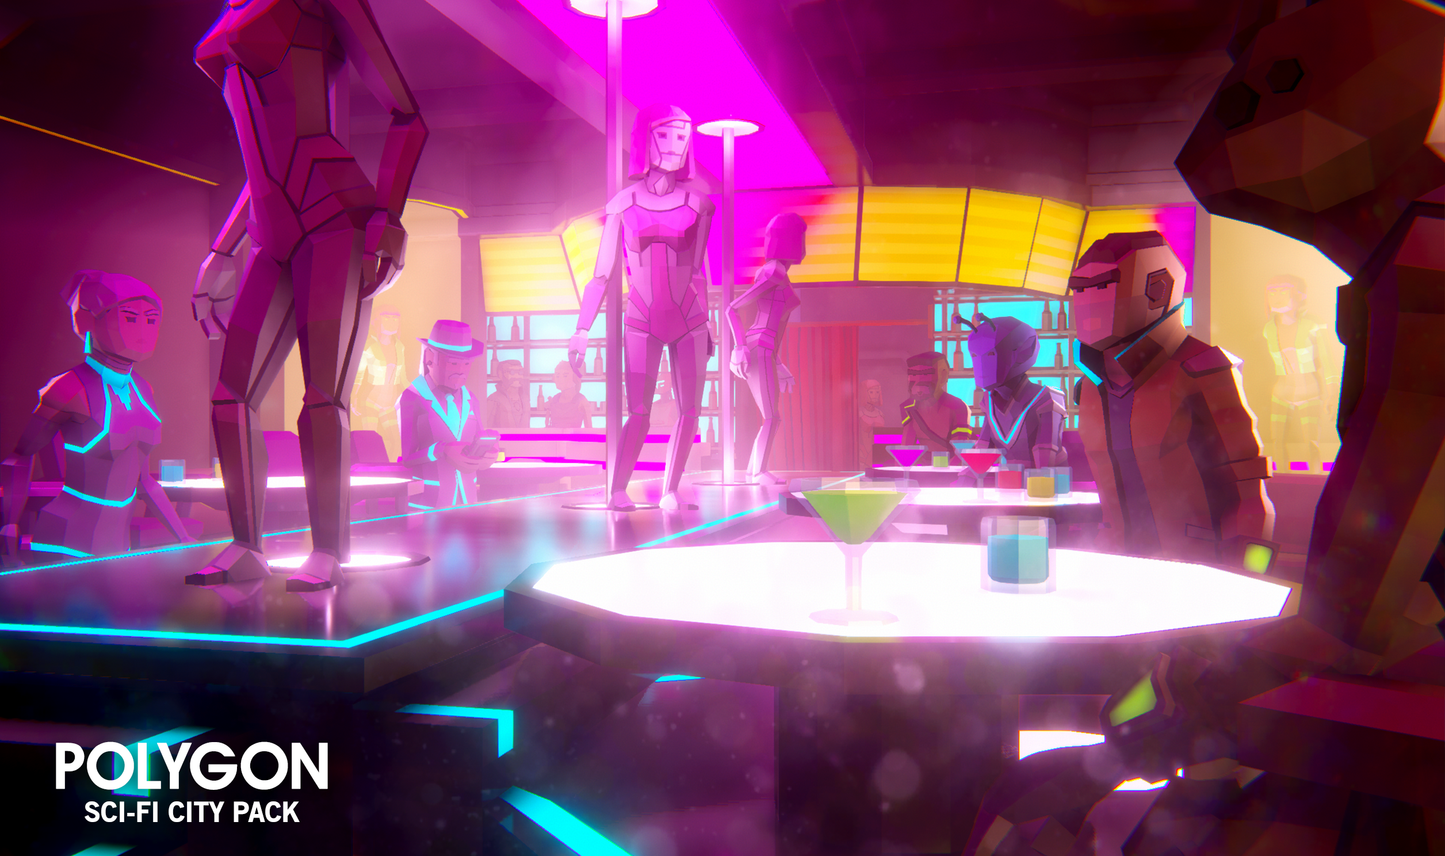 Low poly characters dancing in a sci-fi club